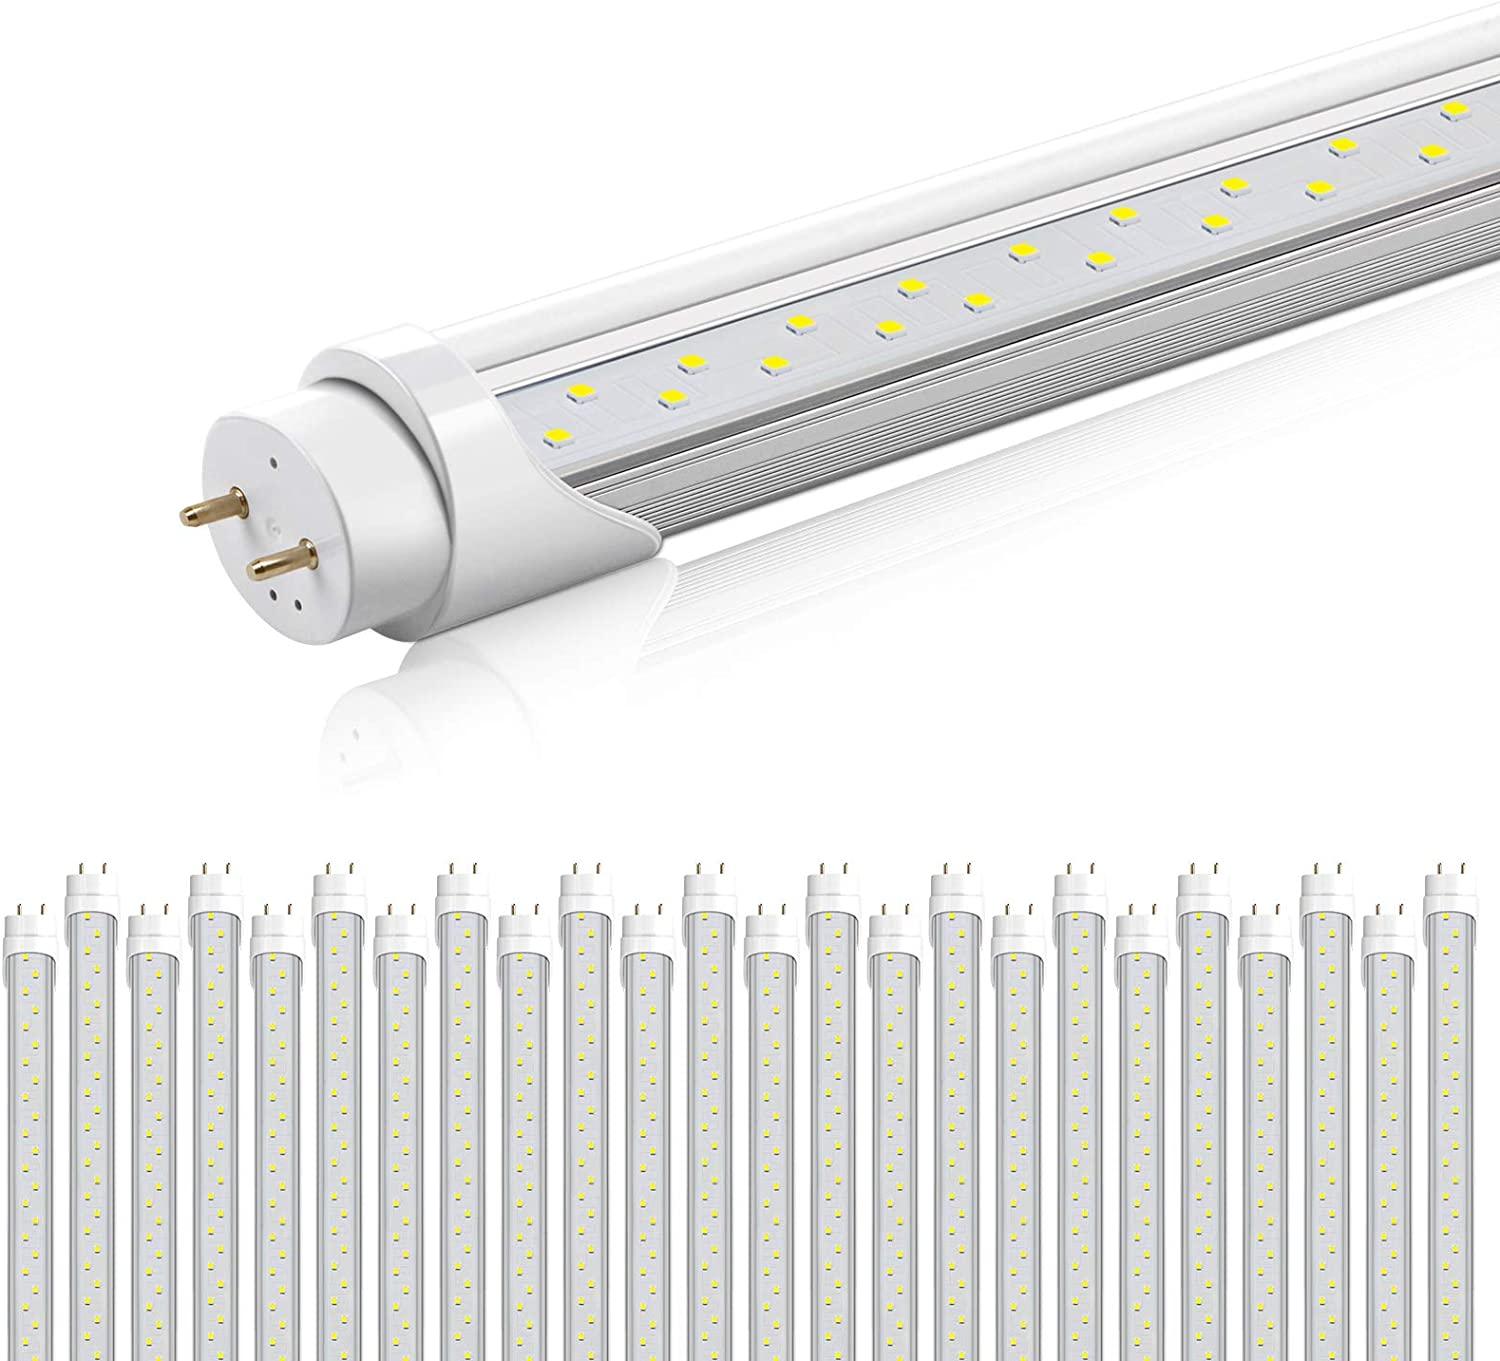 Barrina T8 T10 T12 LED Light Tube 4FT 24W 6000K Super Bright White 3200LM Dual-End Powered Clear Cover Fluorescent Bulb Replacement ETL Listed 25-Pack - Barrina led